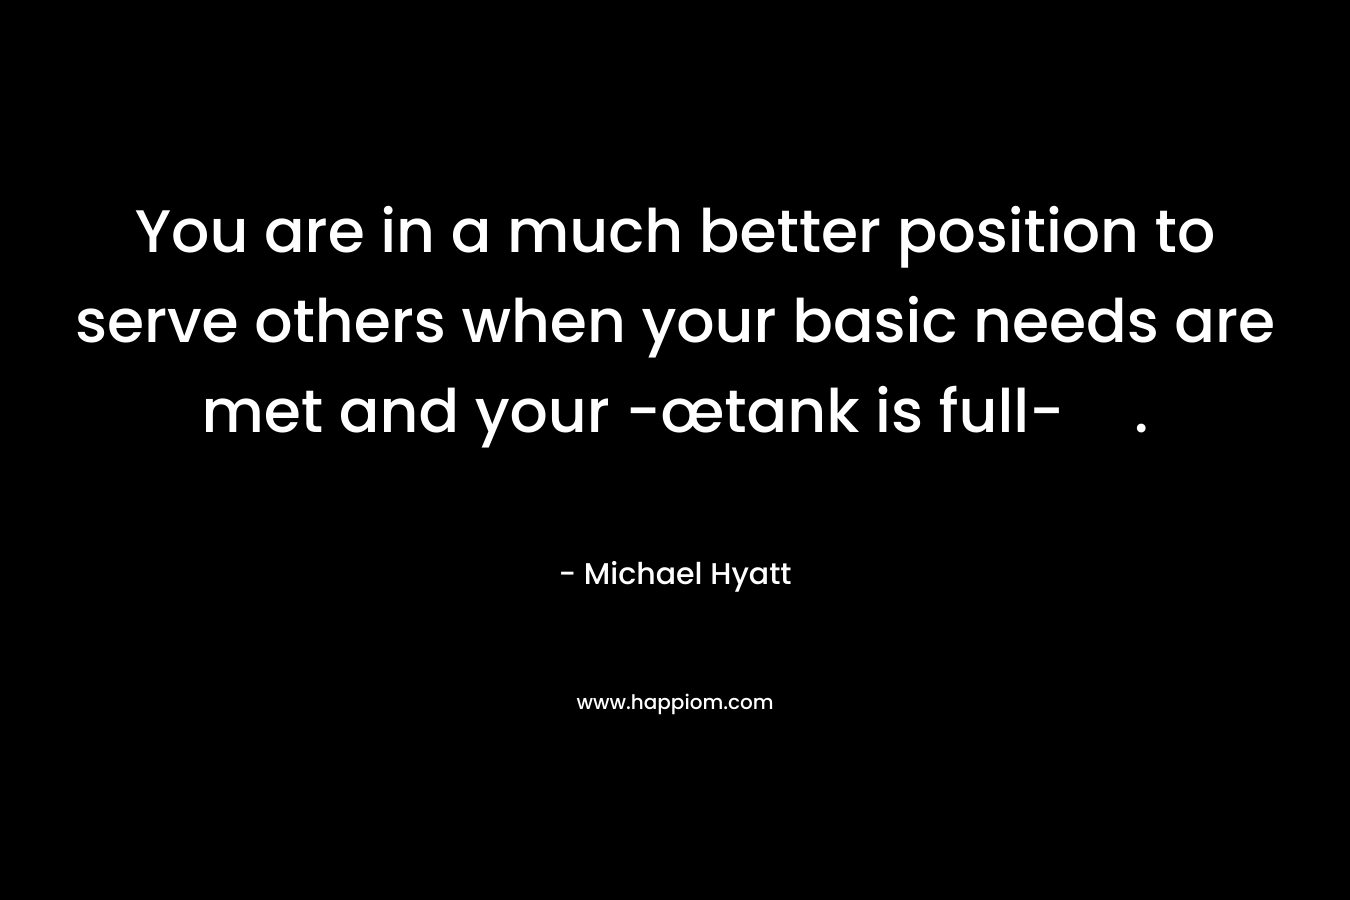 You are in a much better position to serve others when your basic needs are met and your -œtank is full-.